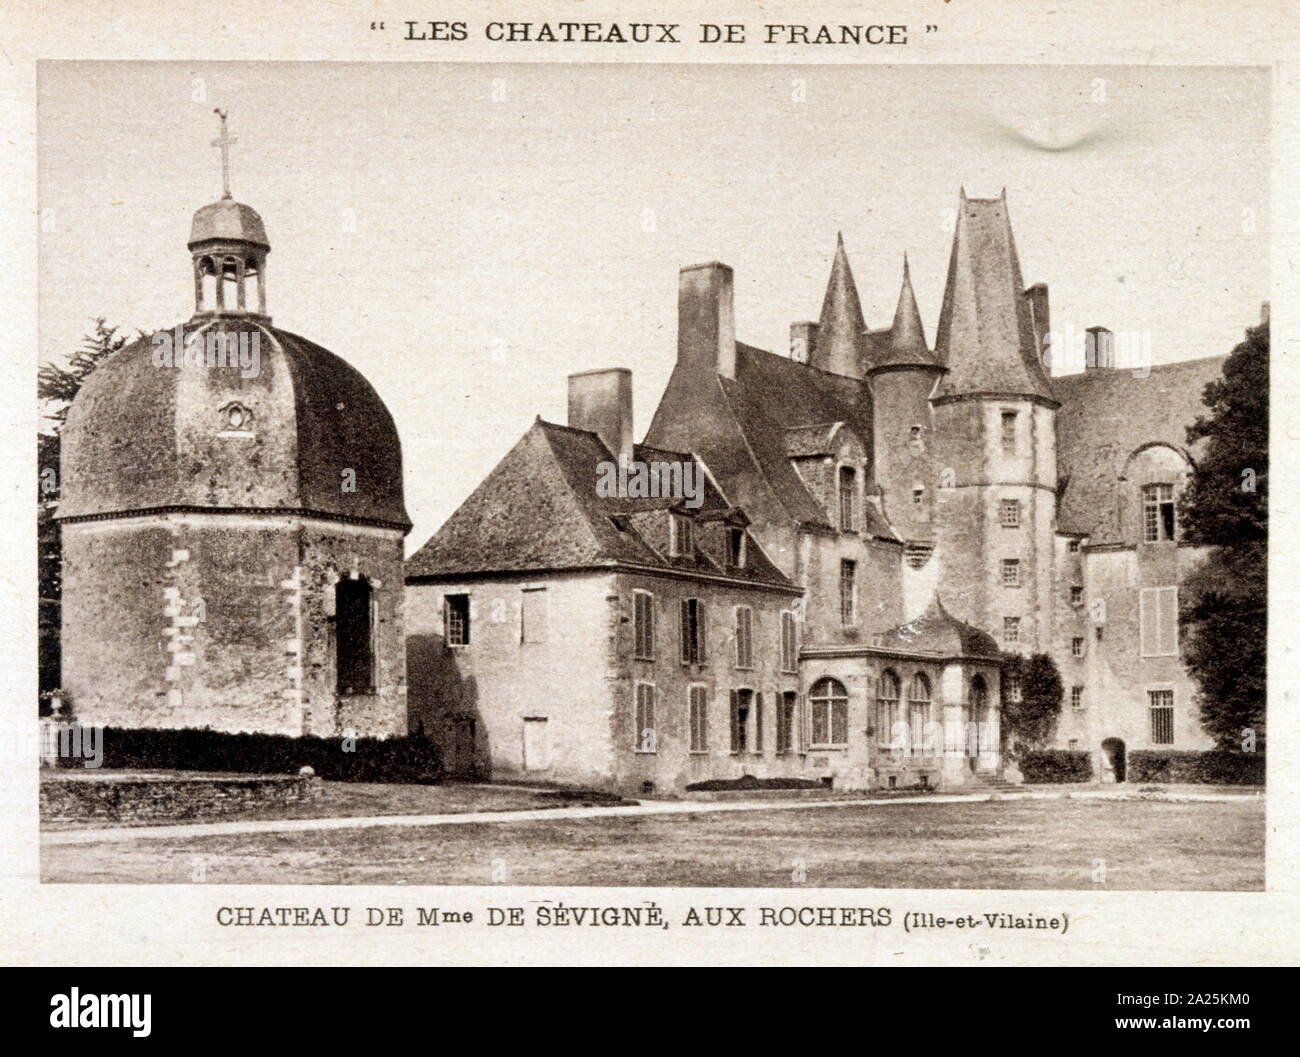 Rochers-Sévigné castle, former Breton residence of Madame de Sevigne, is a Gothic manor house of the fifteenth century near Vitré in Ille-et-Vilaine. The house is built on an L-shaped plan and has two towers. There is also an octagonal chapel, built by Madame de Sevigne in 1671 for her uncle, the Abbe de Coulanges, named the Bien-Bon, stables and commons added in the eighteenth century. At the bottom of the garden, a wall in the shape of an arc causes an echo when one is placed on a slab. Madame de Sevigne used it to read to her daughter. Stock Photo